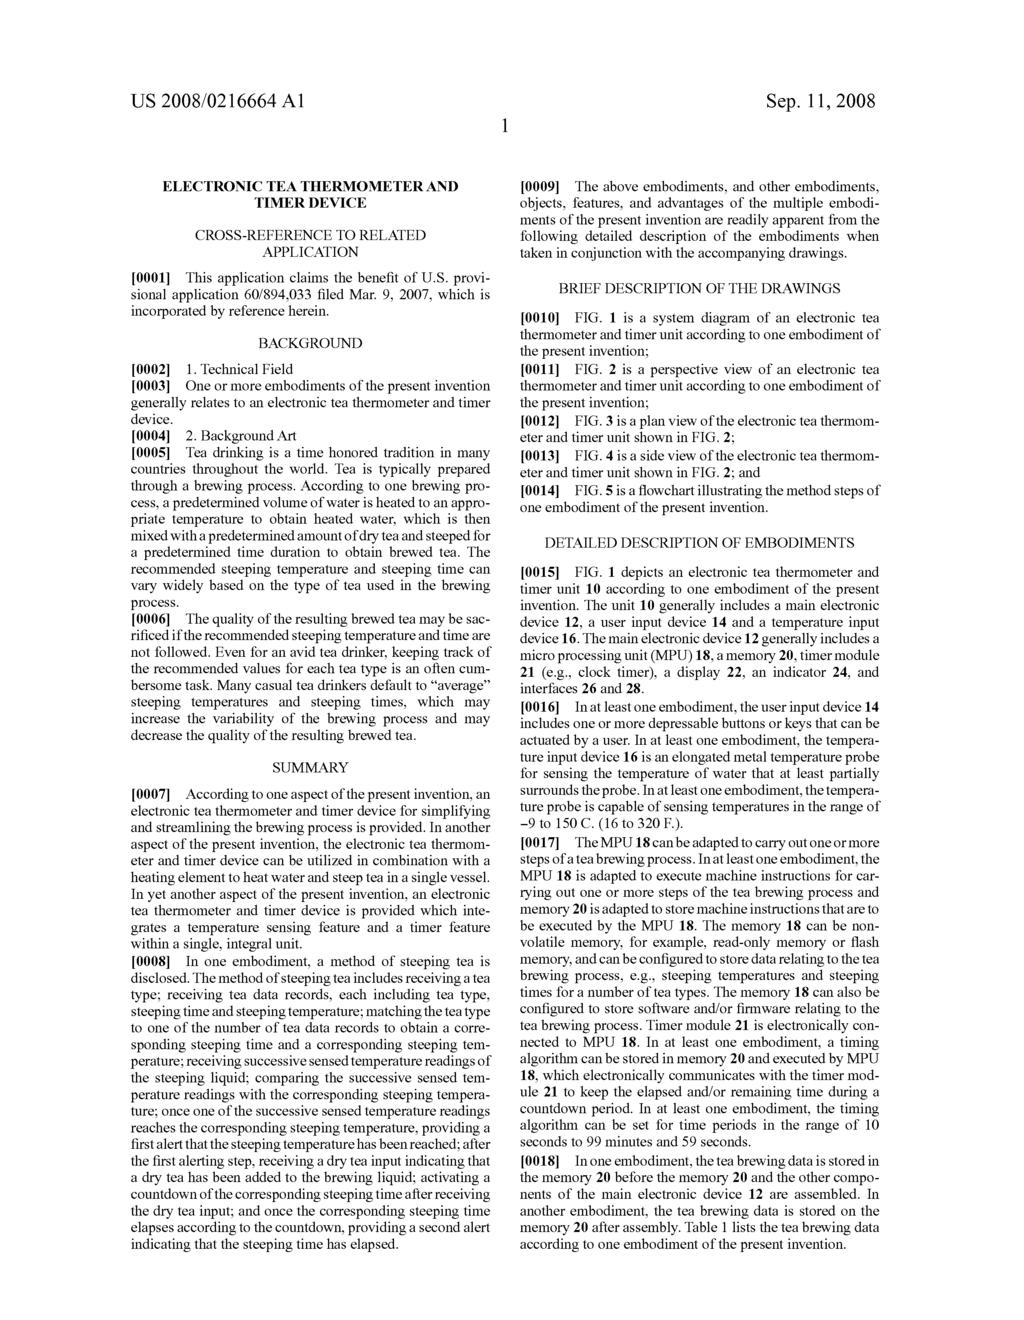 US 2008/0216664 A1 Sep. 11, 2008 ELECTRONICTEATHERMOMETER AND TIMER DEVICE CROSS-REFERENCE TO RELATED APPLICATION 0001. This application claims the benefit of U.S. provi sional application 60/894,033 filed Mar.